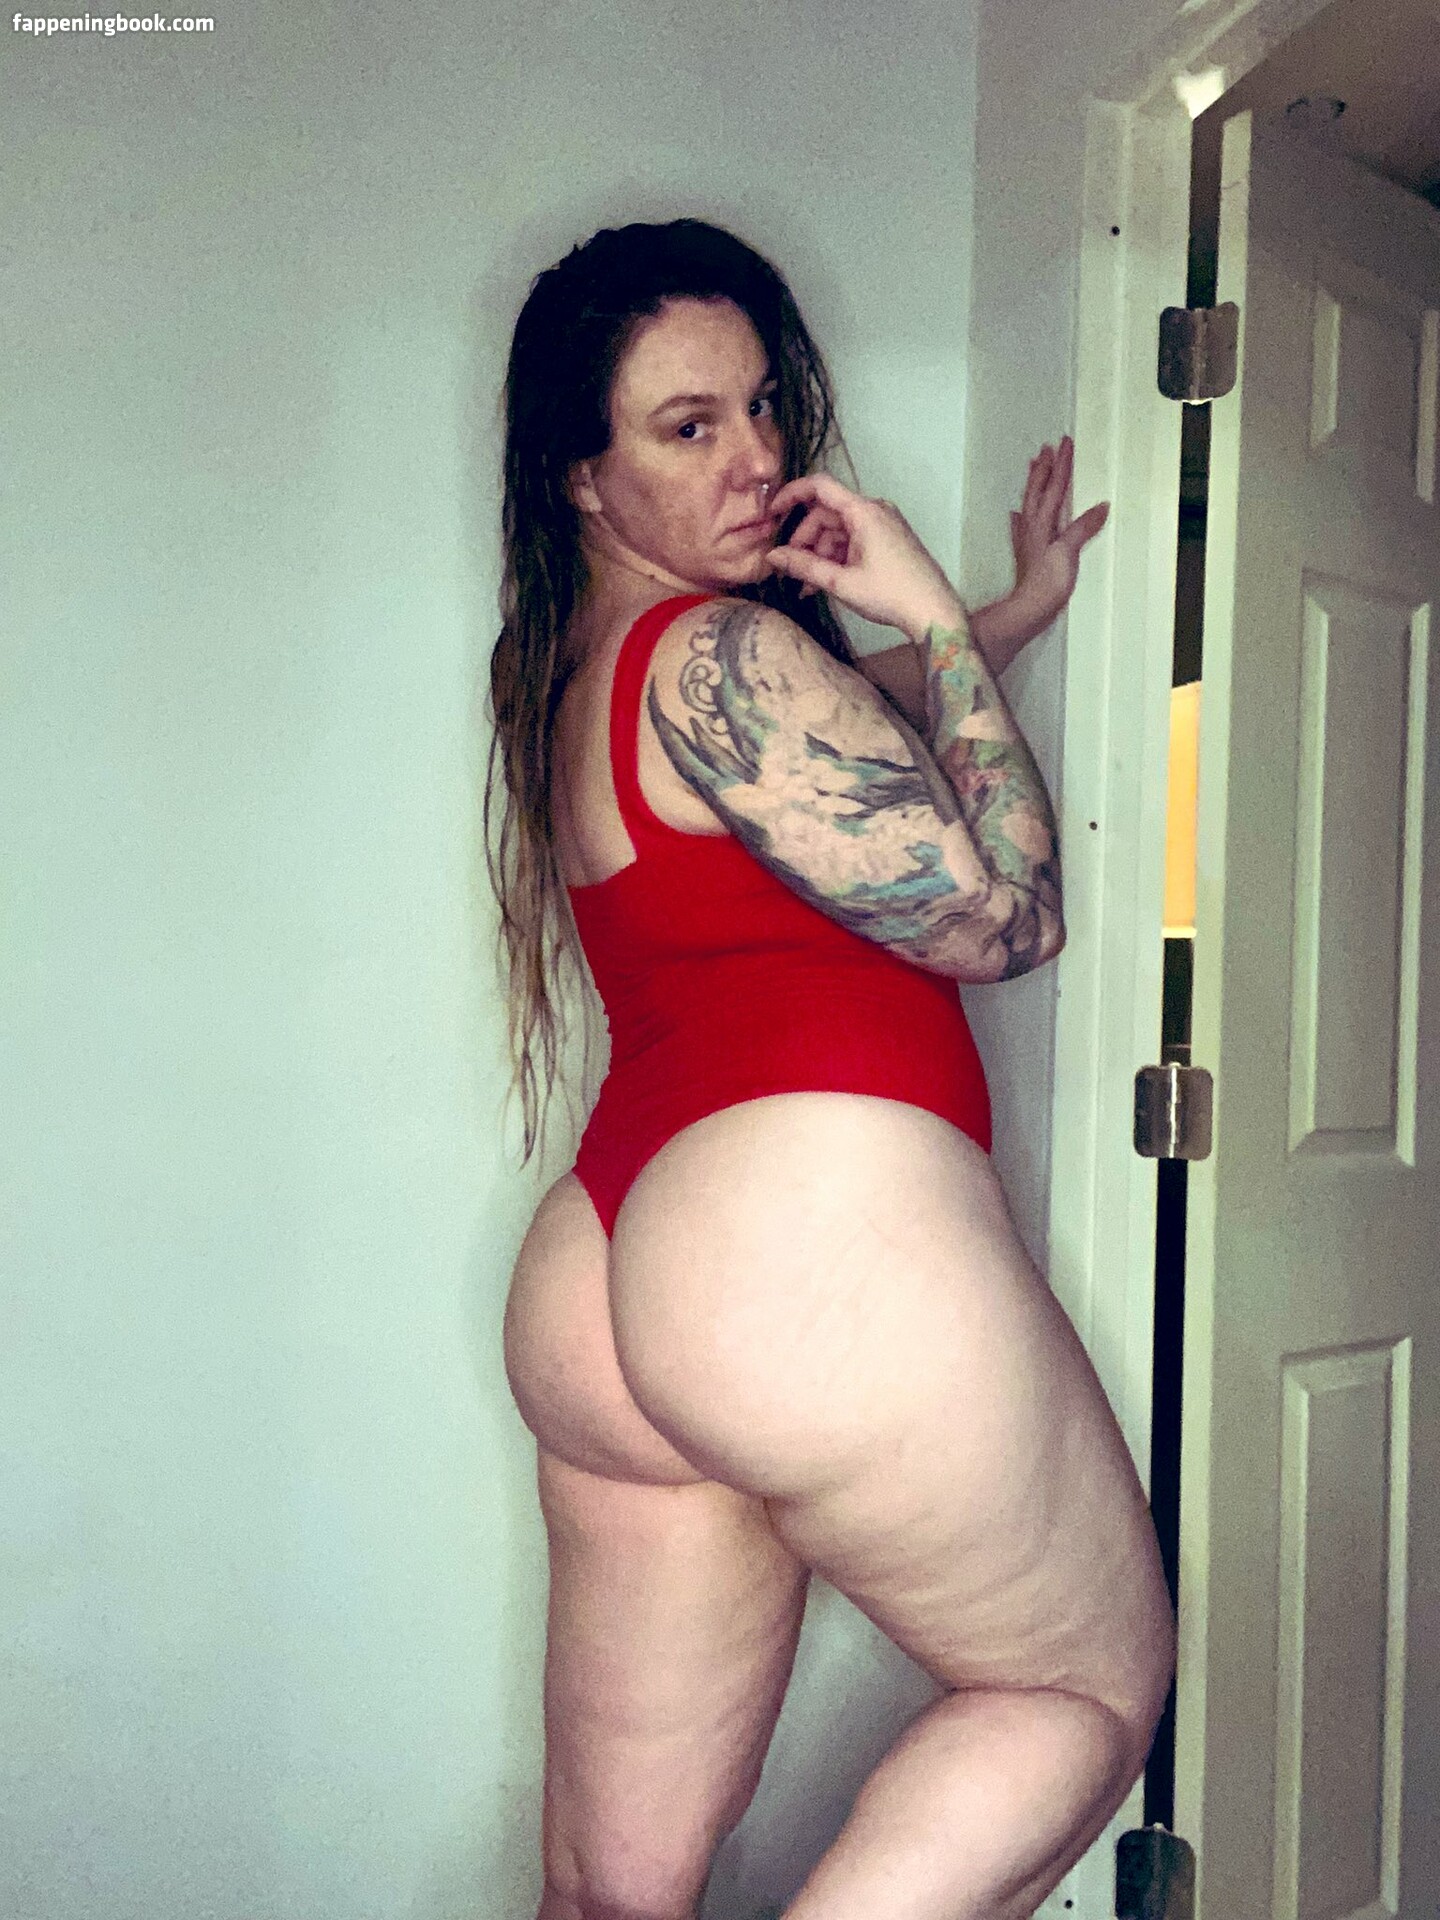 remedy skye thefishingstripper onlyfans the fappening